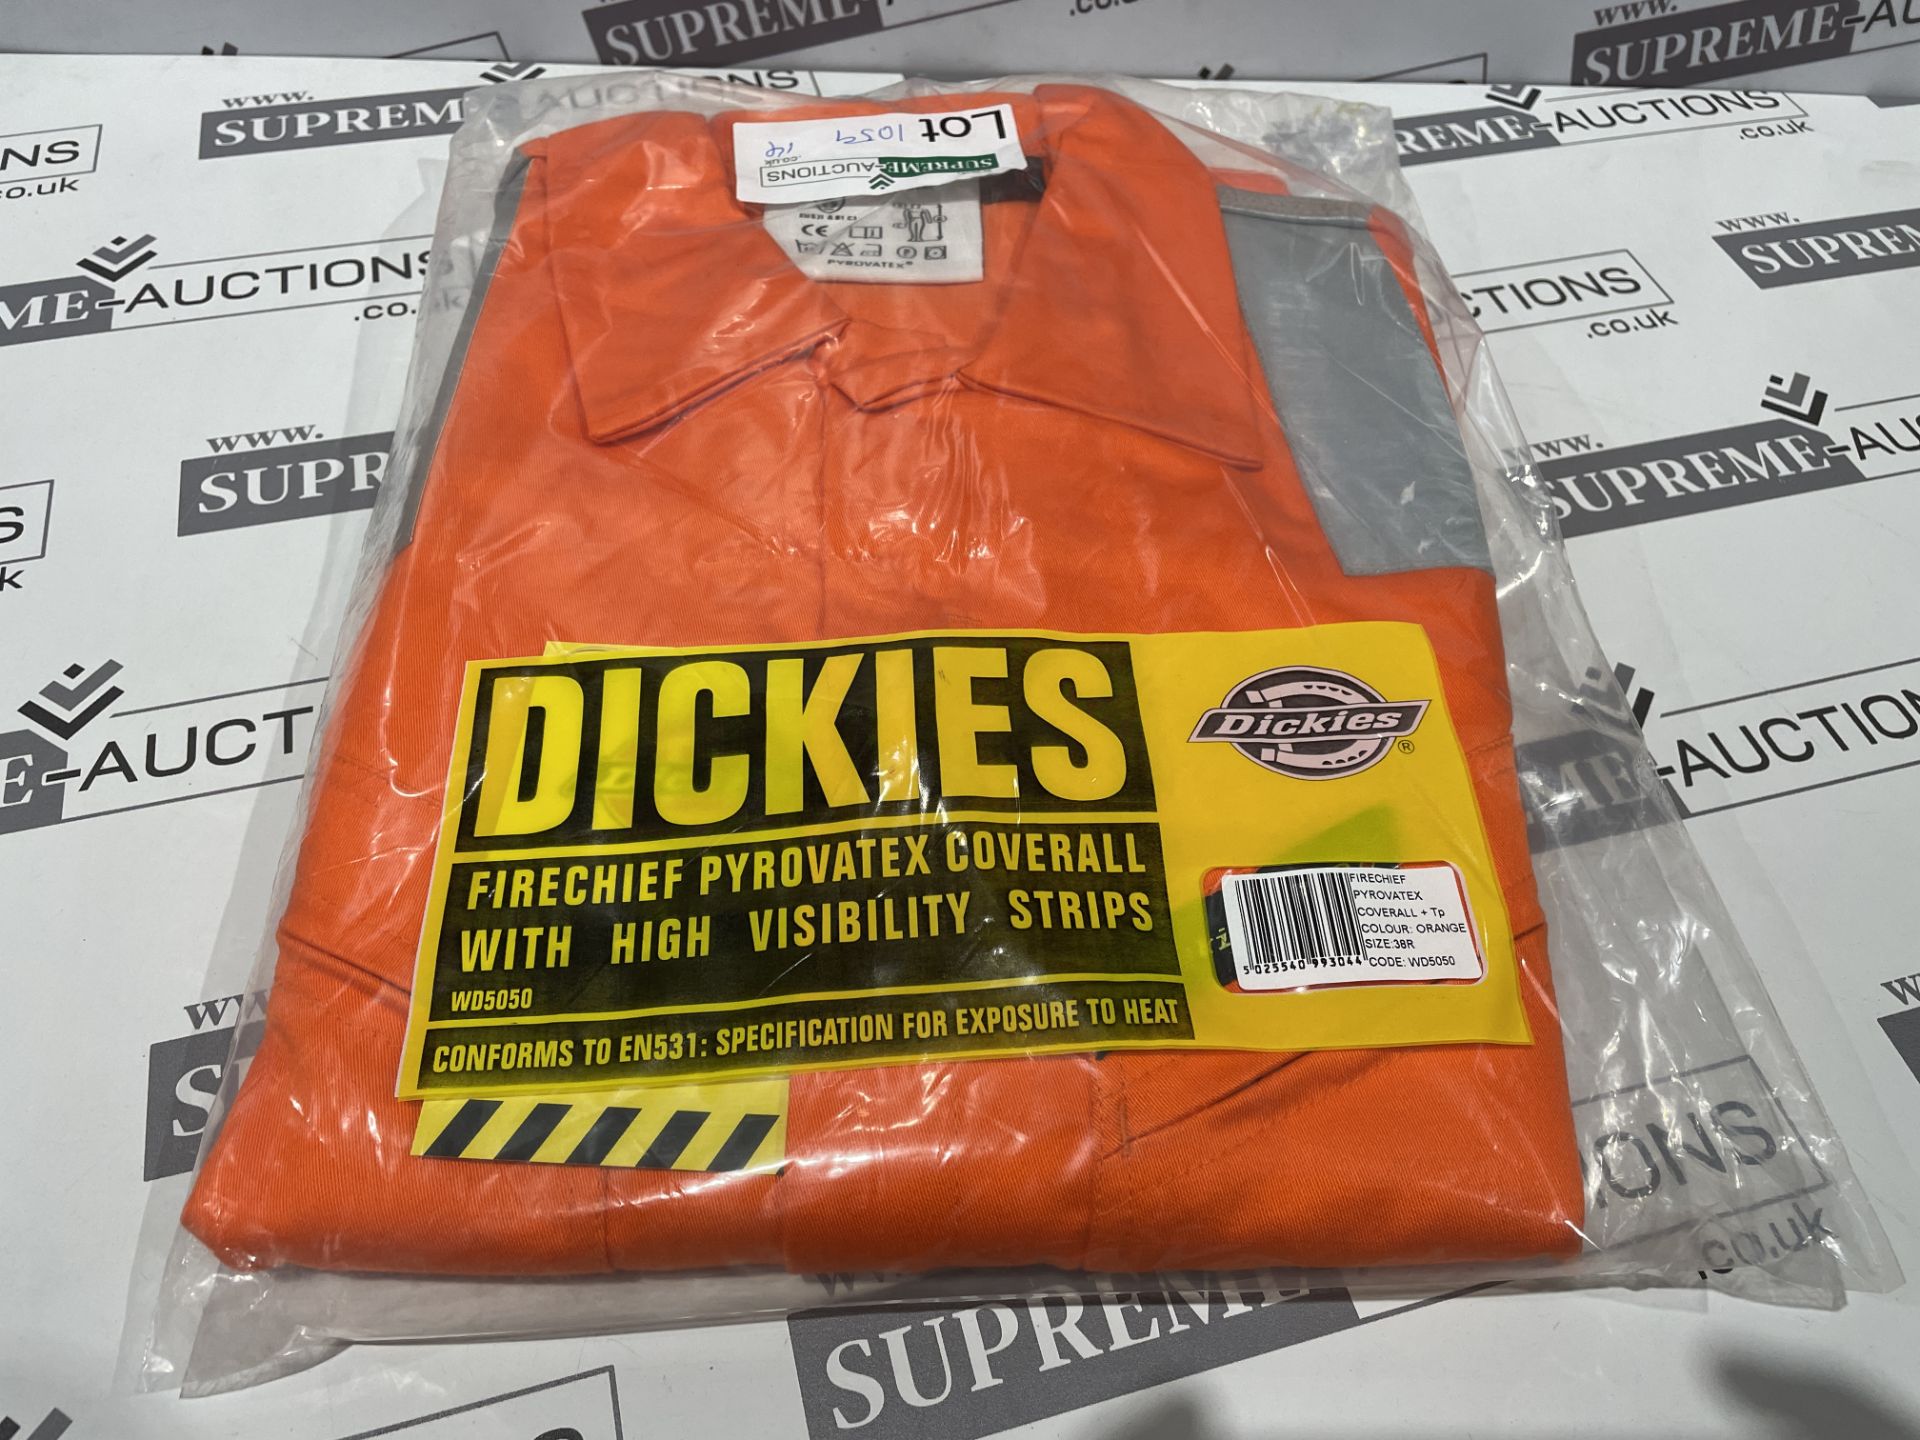 3 X BRAND NEW DICKIES FIRECHIEF ANTI STATIC COVERALLS SIZE 38R S1-3